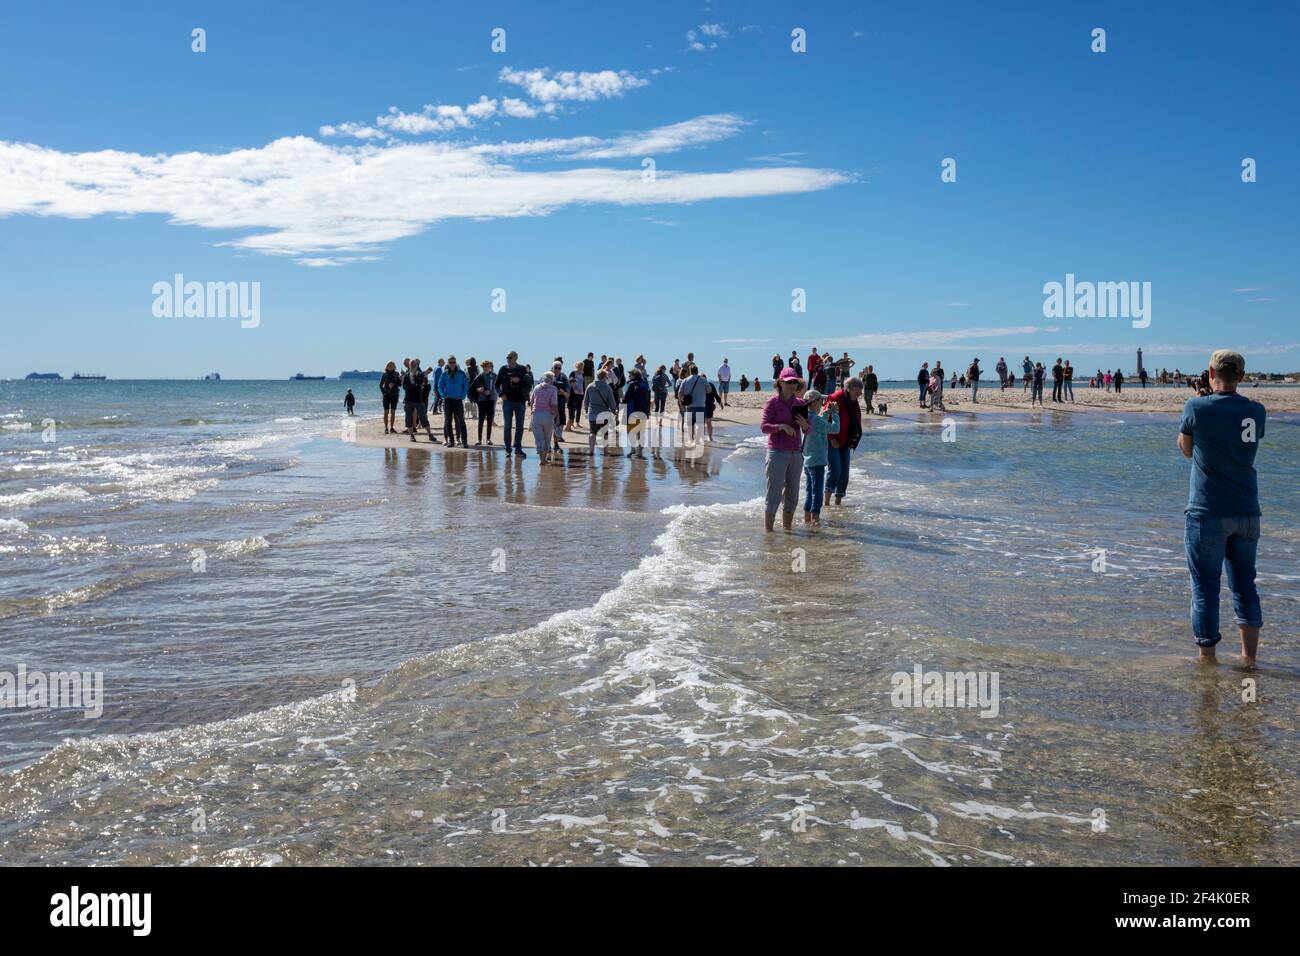 Skagen, Denmark - August 31, 2020: Photo of tourists at Grenen, northernmost point of Denmark, taken standing with one foot in the Baltic Sea and the Stock Photo